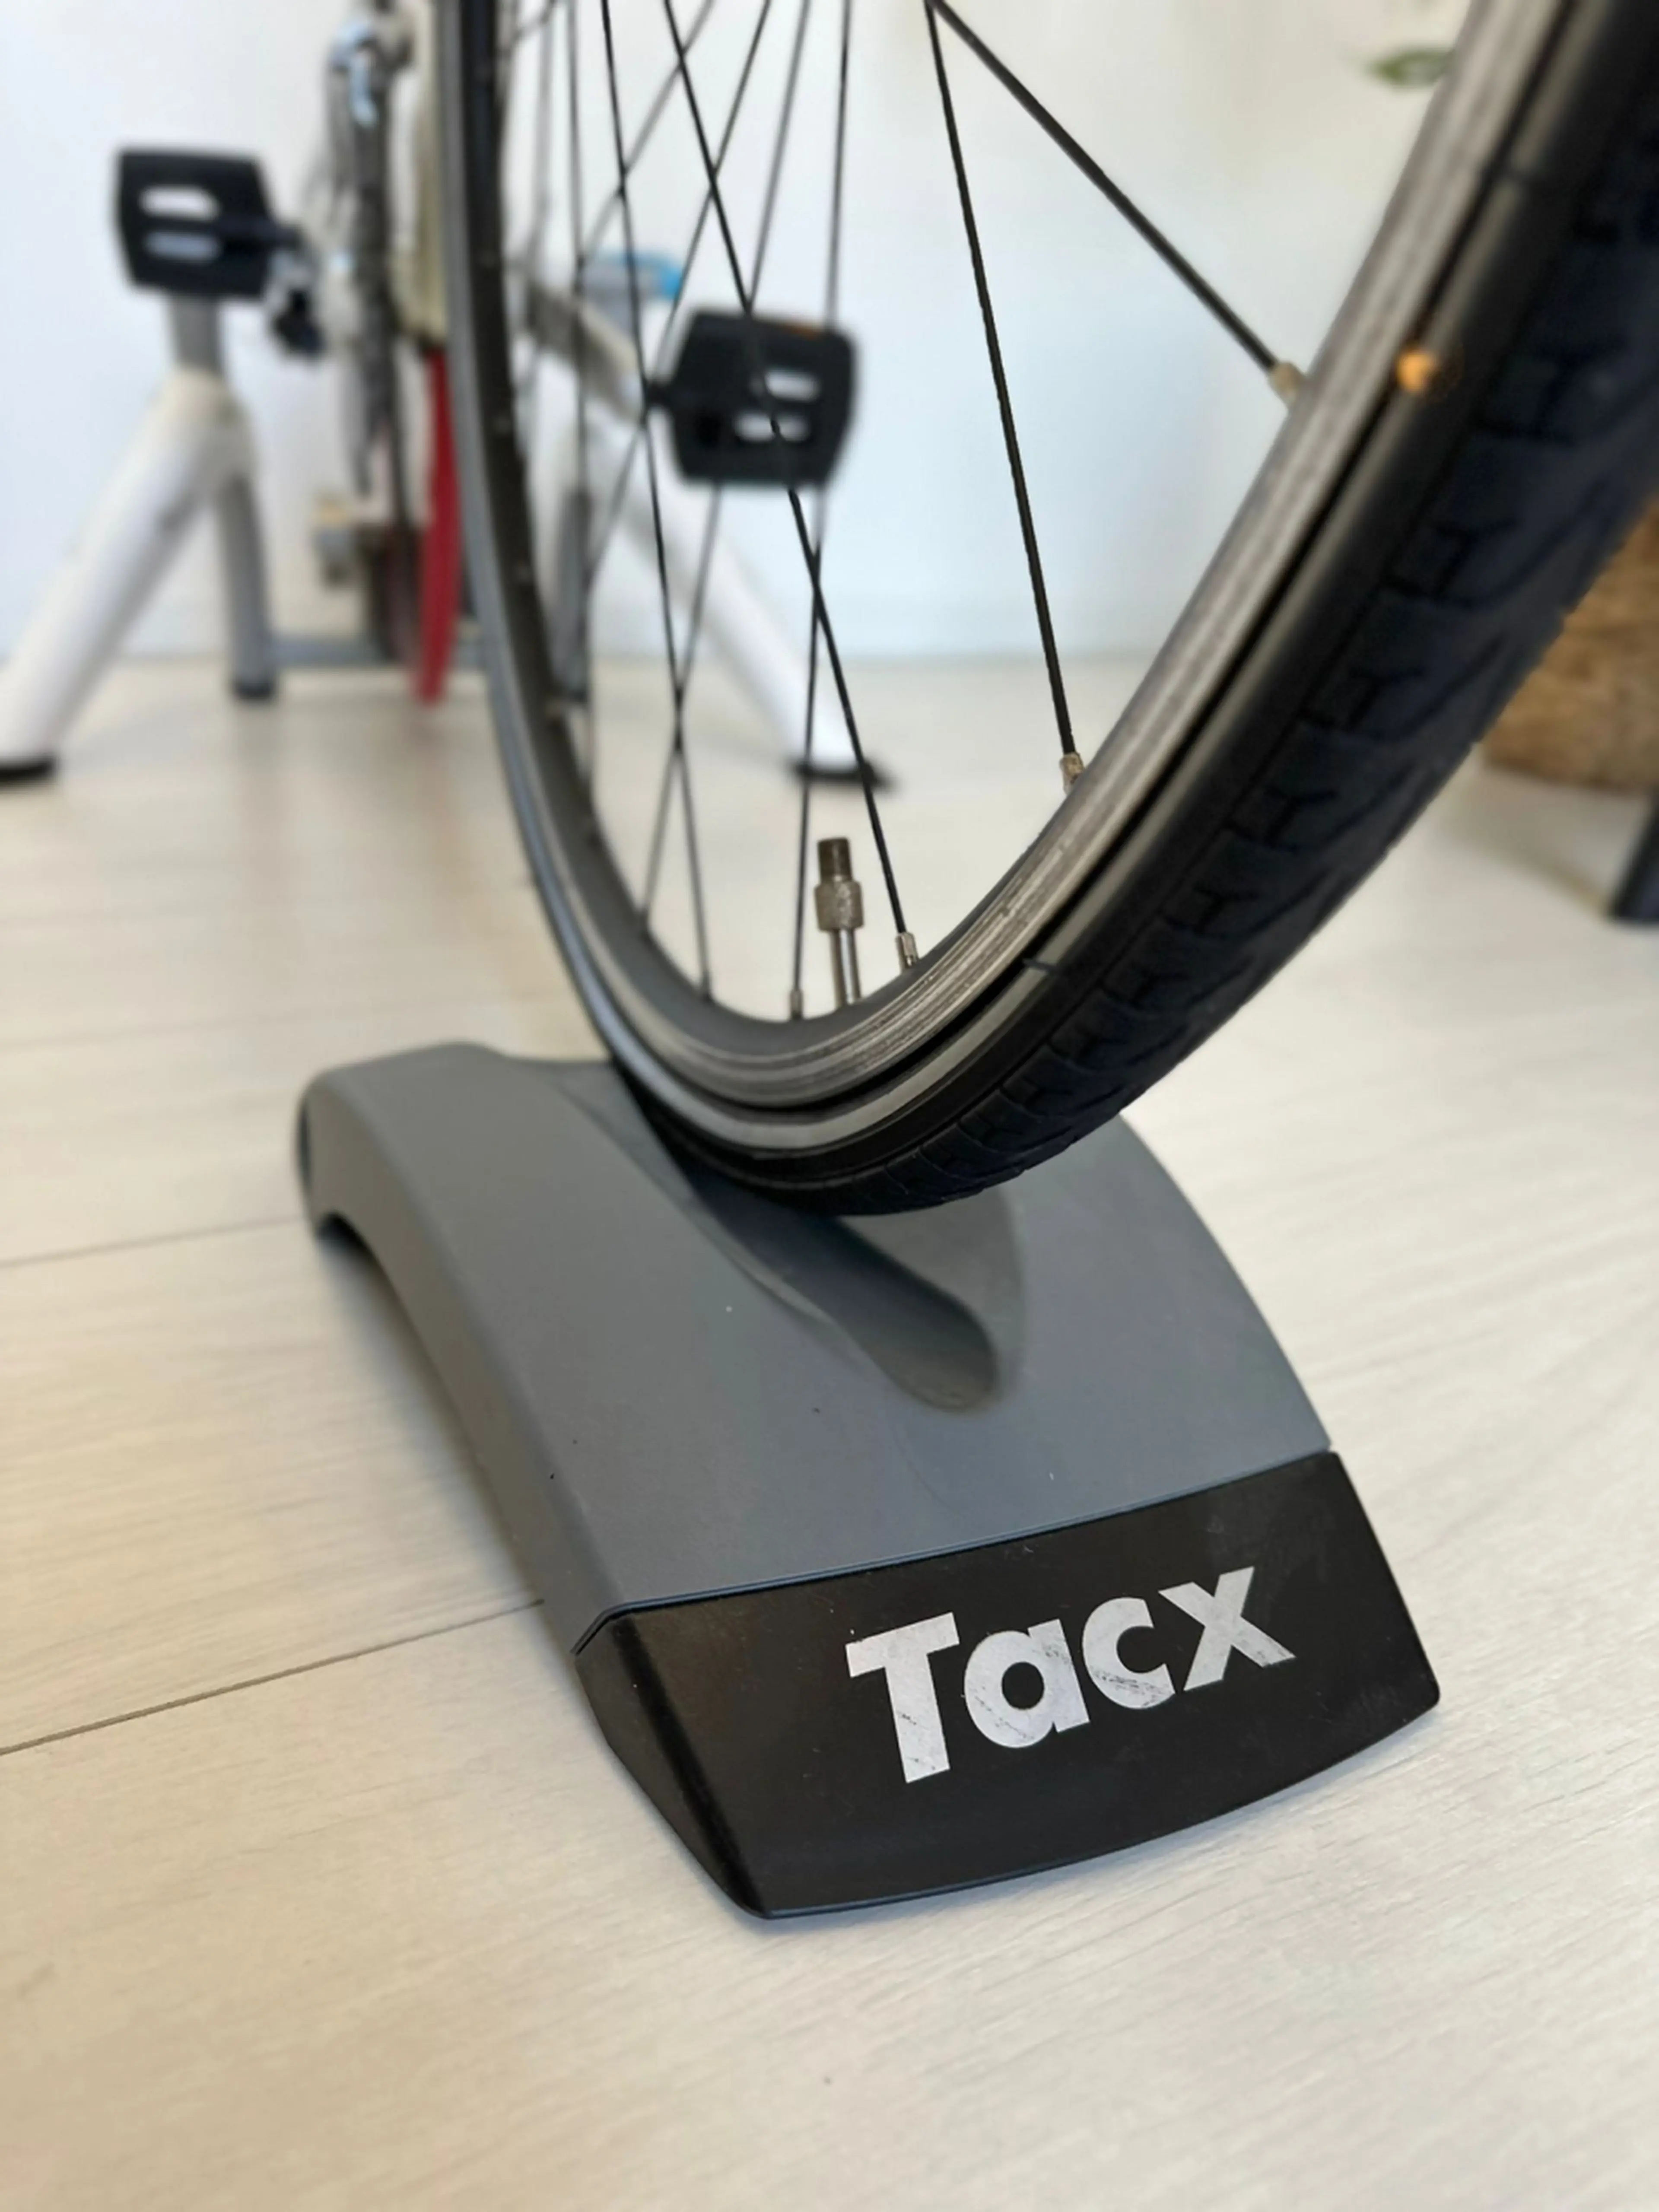 2. Home Tainer Flow Smart T2240, tacx